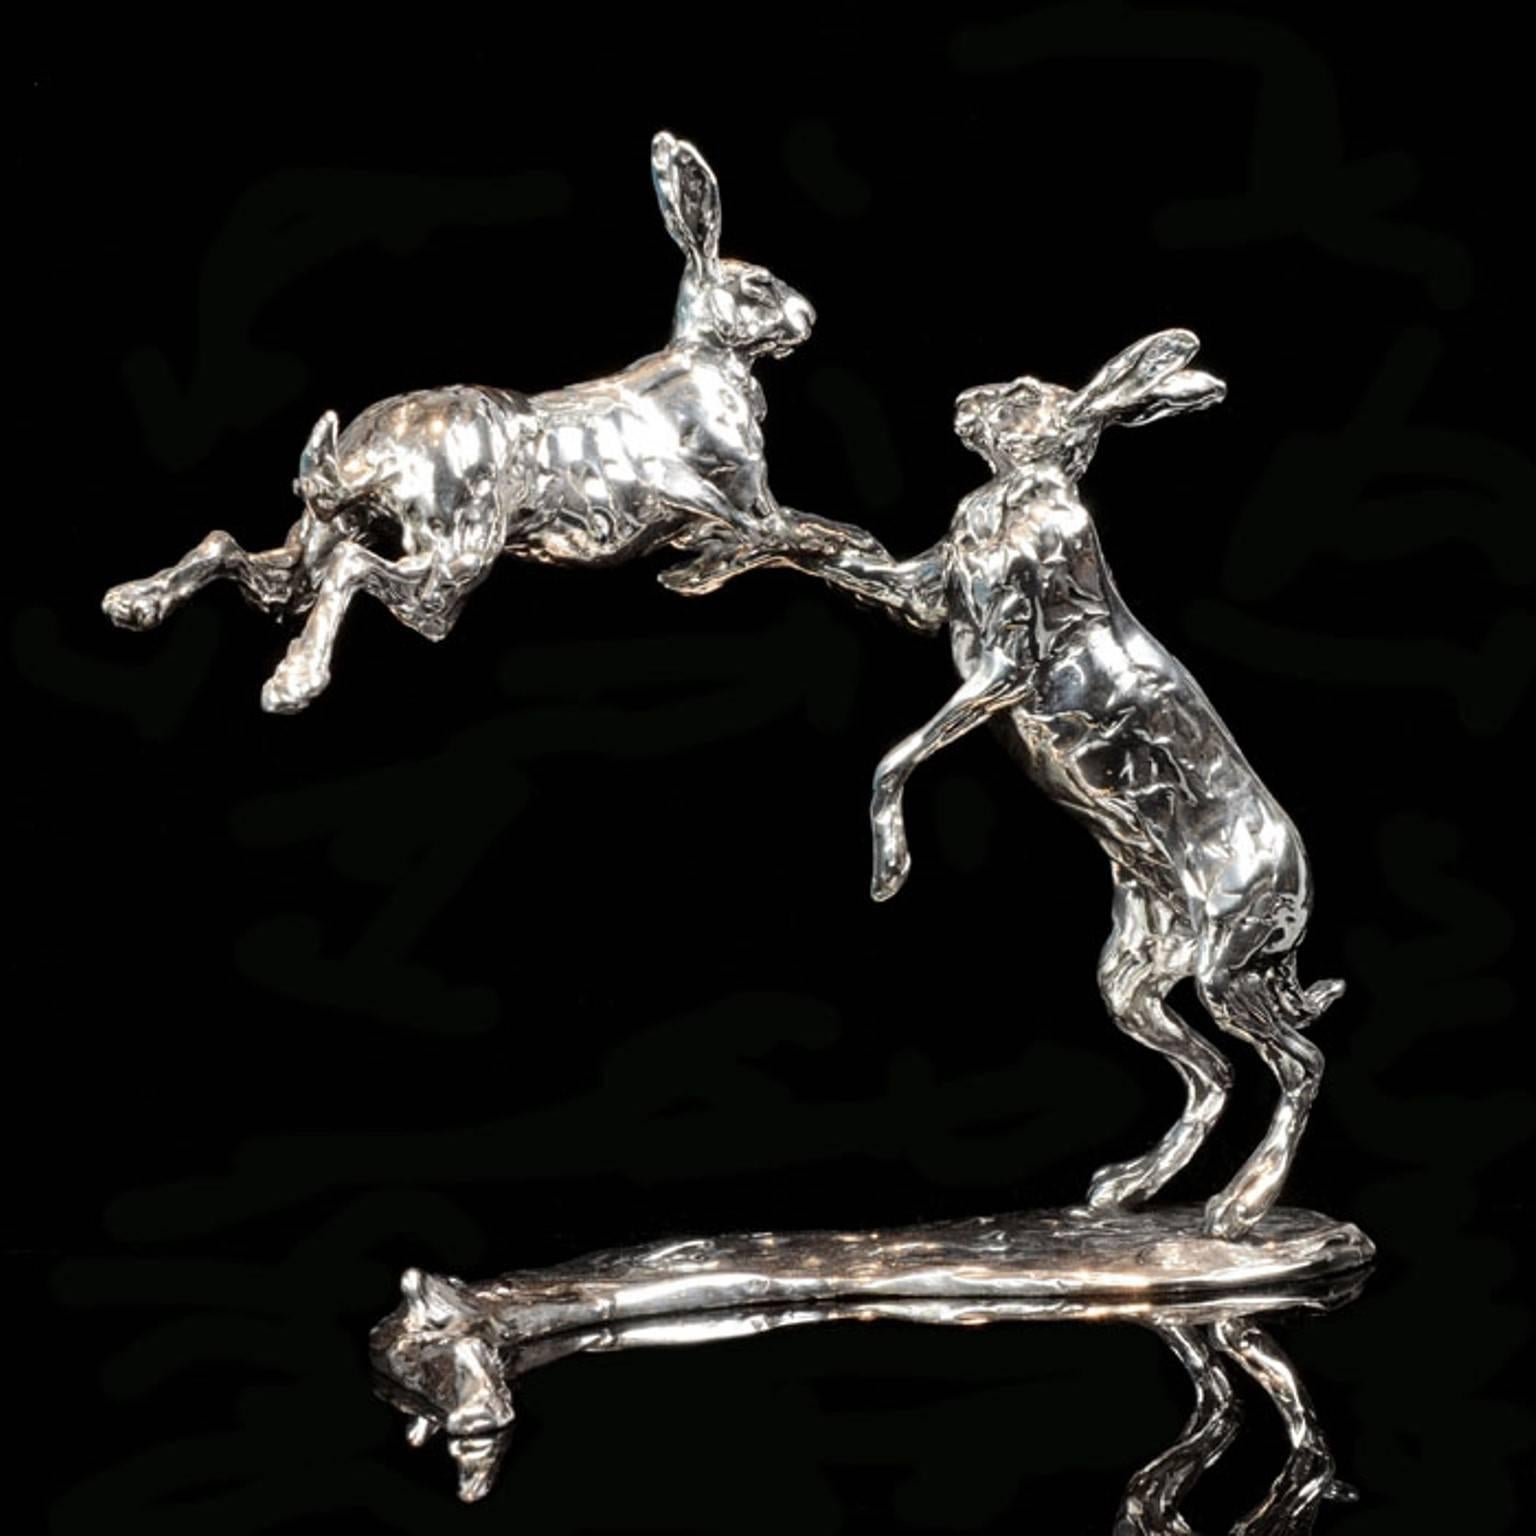 Lucy Kinsella 'Leaping Hares' sterling silver sculpture 1